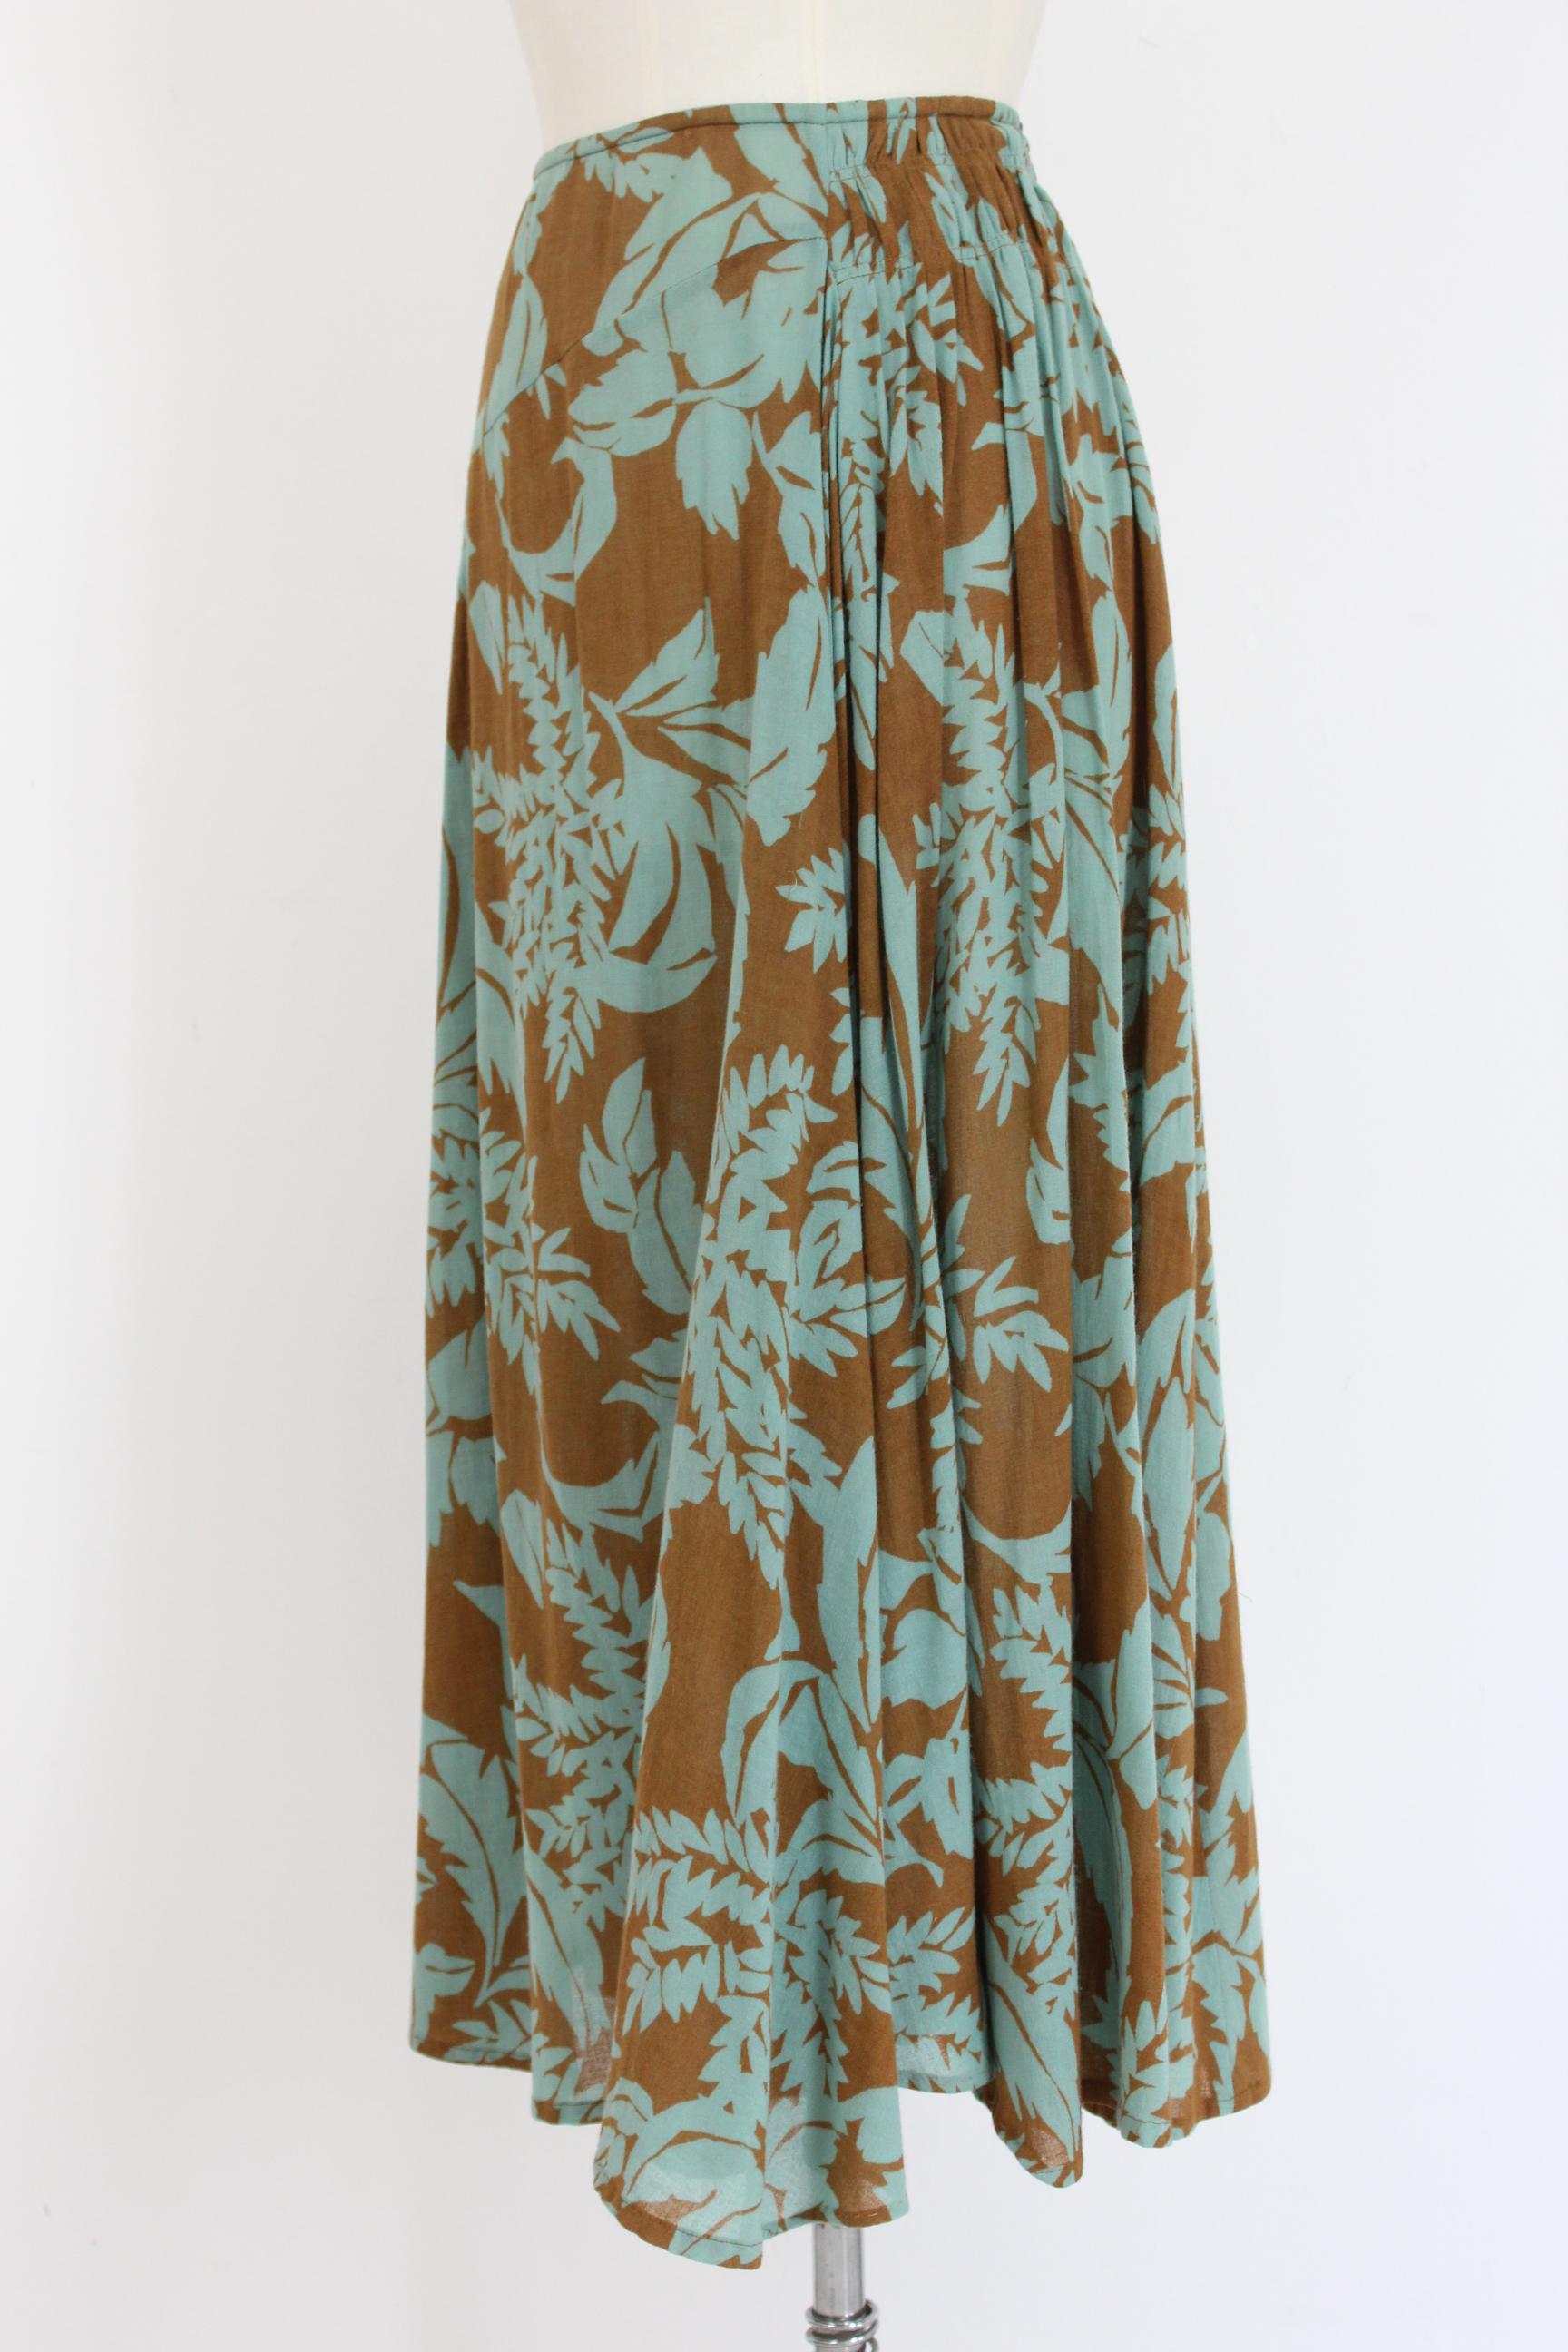 Dries Van Noten 90s vintage skirt. Long soft model with flounces. Green and brown color with floral designs. 100% cotton. Made in Belgium. Excellent vintage condition.

Size: 40 It 6 Us 8 Uk 36 Belgium

Waist: 37 cm
Length: 89 cm